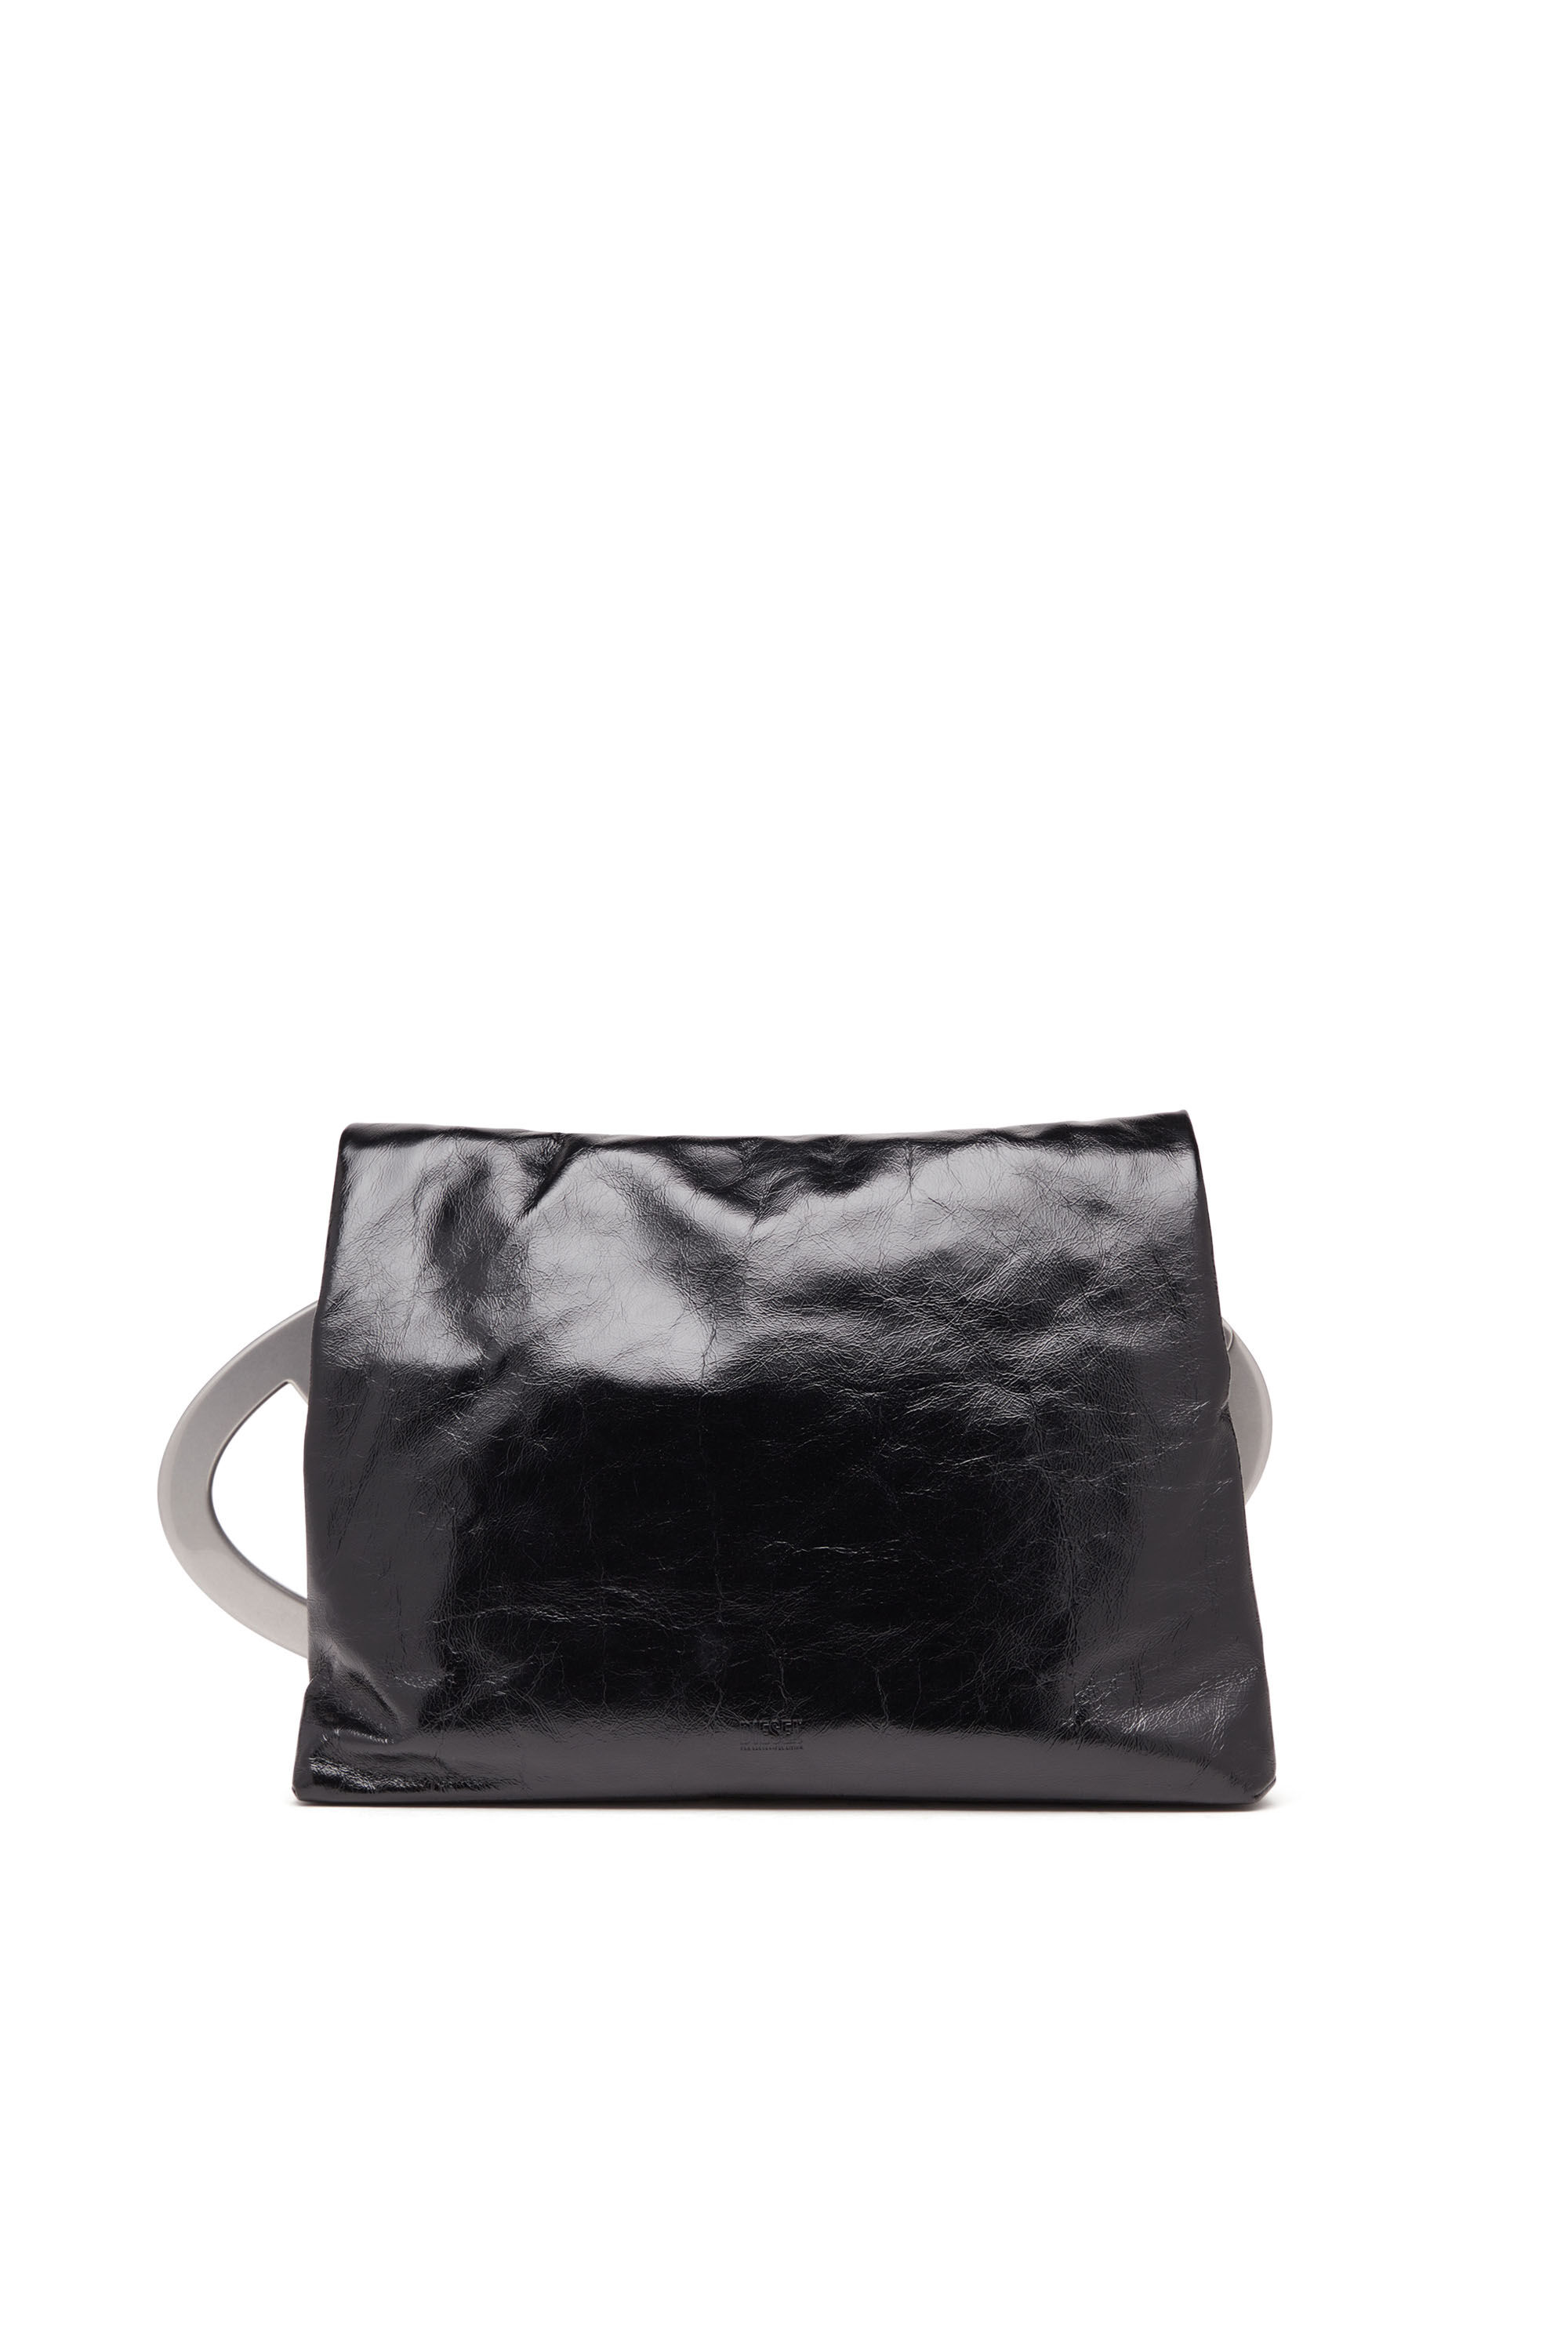 Diesel - BIG-D POUCH, Female Big-D-Clutch bag in crinkled leather in ブラック - Image 3